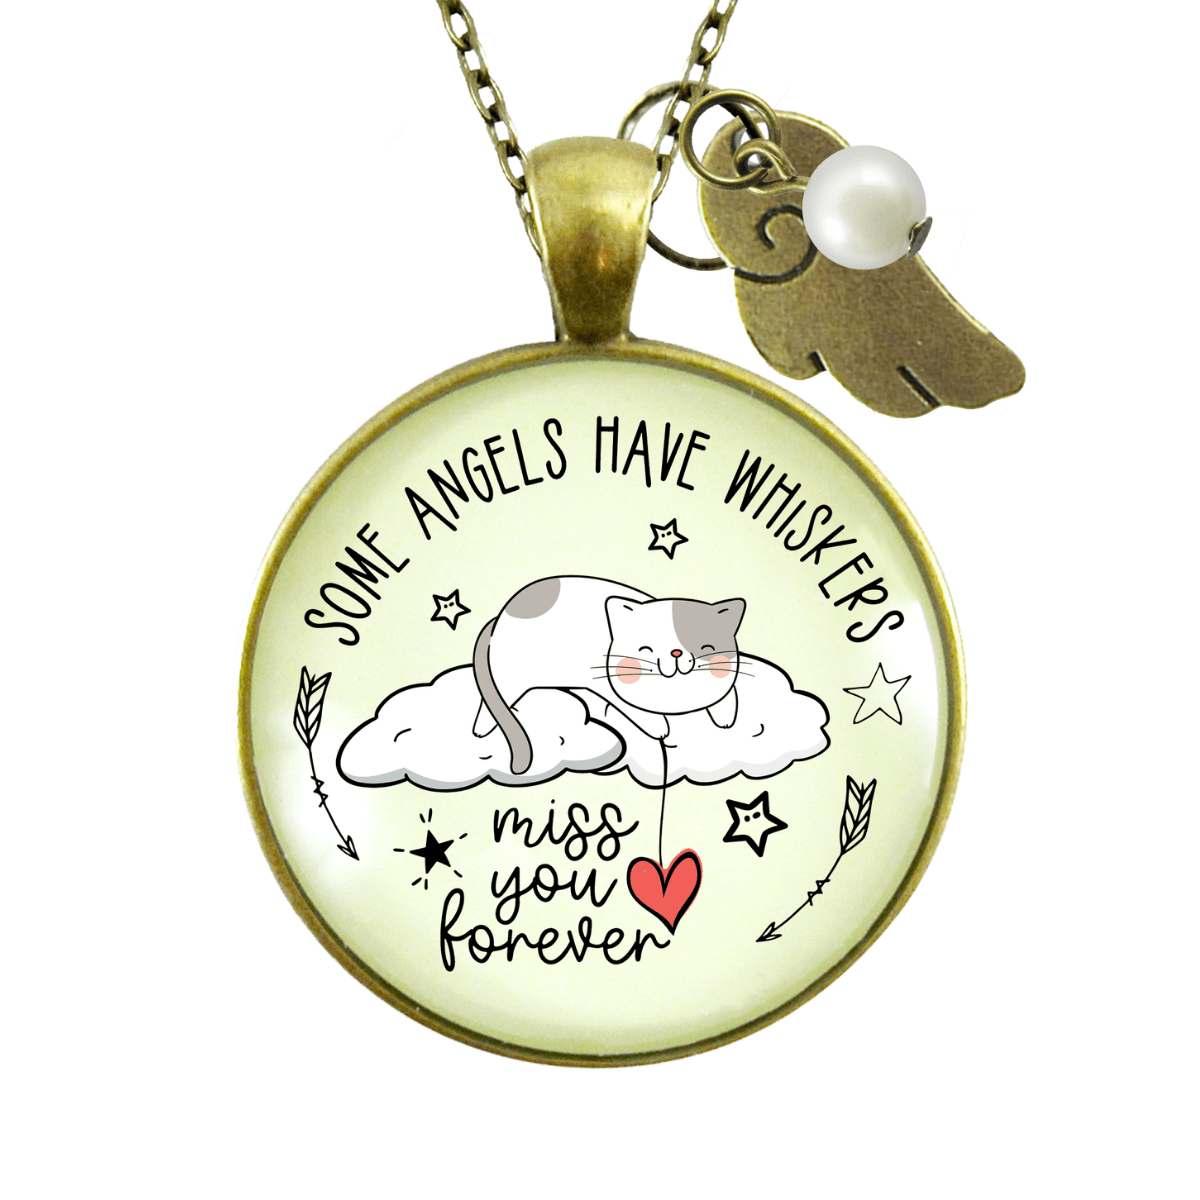 Gutsy Goodness Cat Memorial Necklace Some Angels Have Whiskers - Gutsy Goodness;Cat Memorial Necklace Some Angels Have Whiskers - Gutsy Goodness Handmade Jewelry Gifts